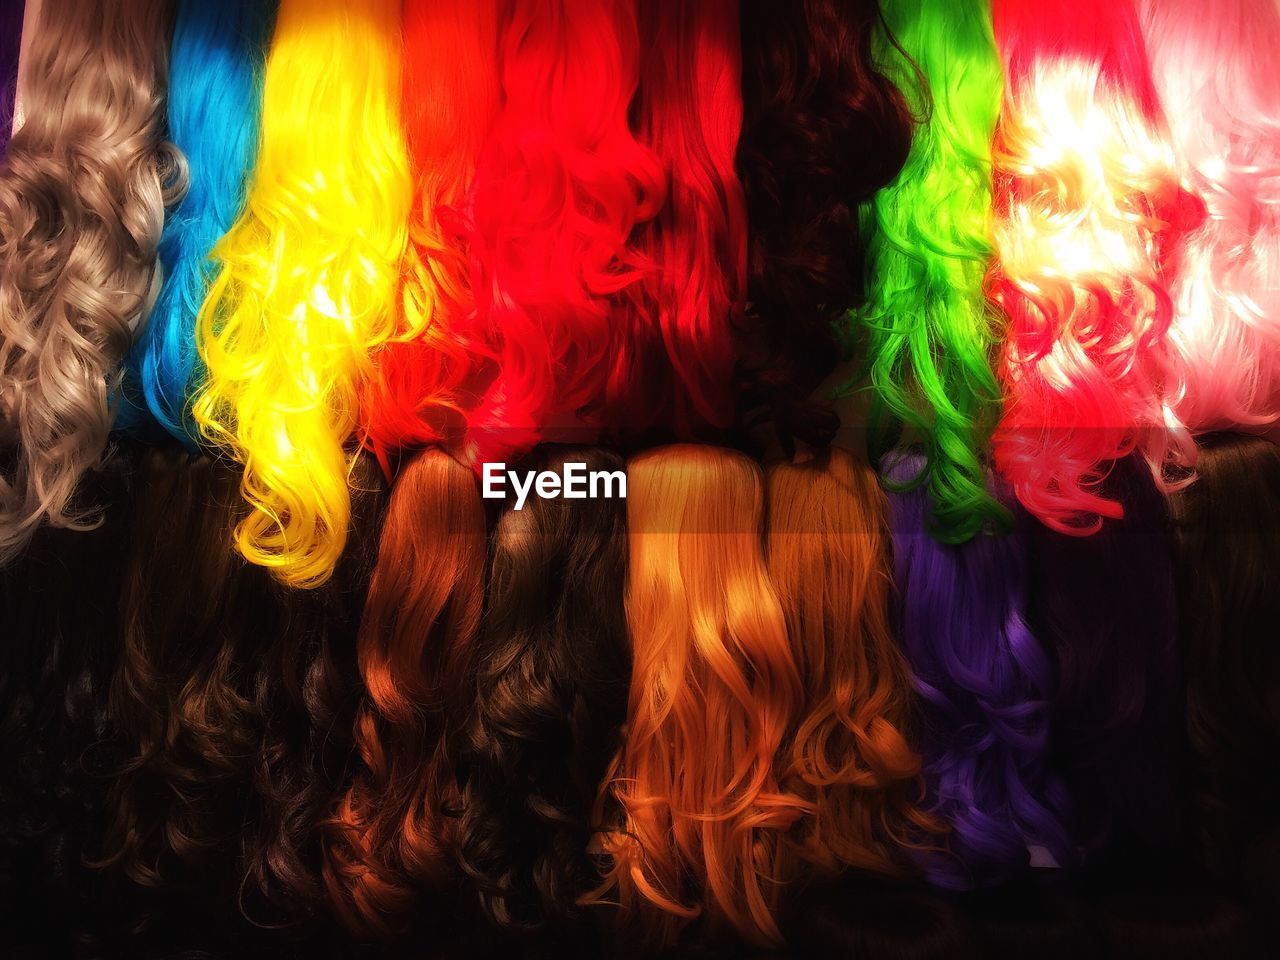 Colorful wigs for sale in store